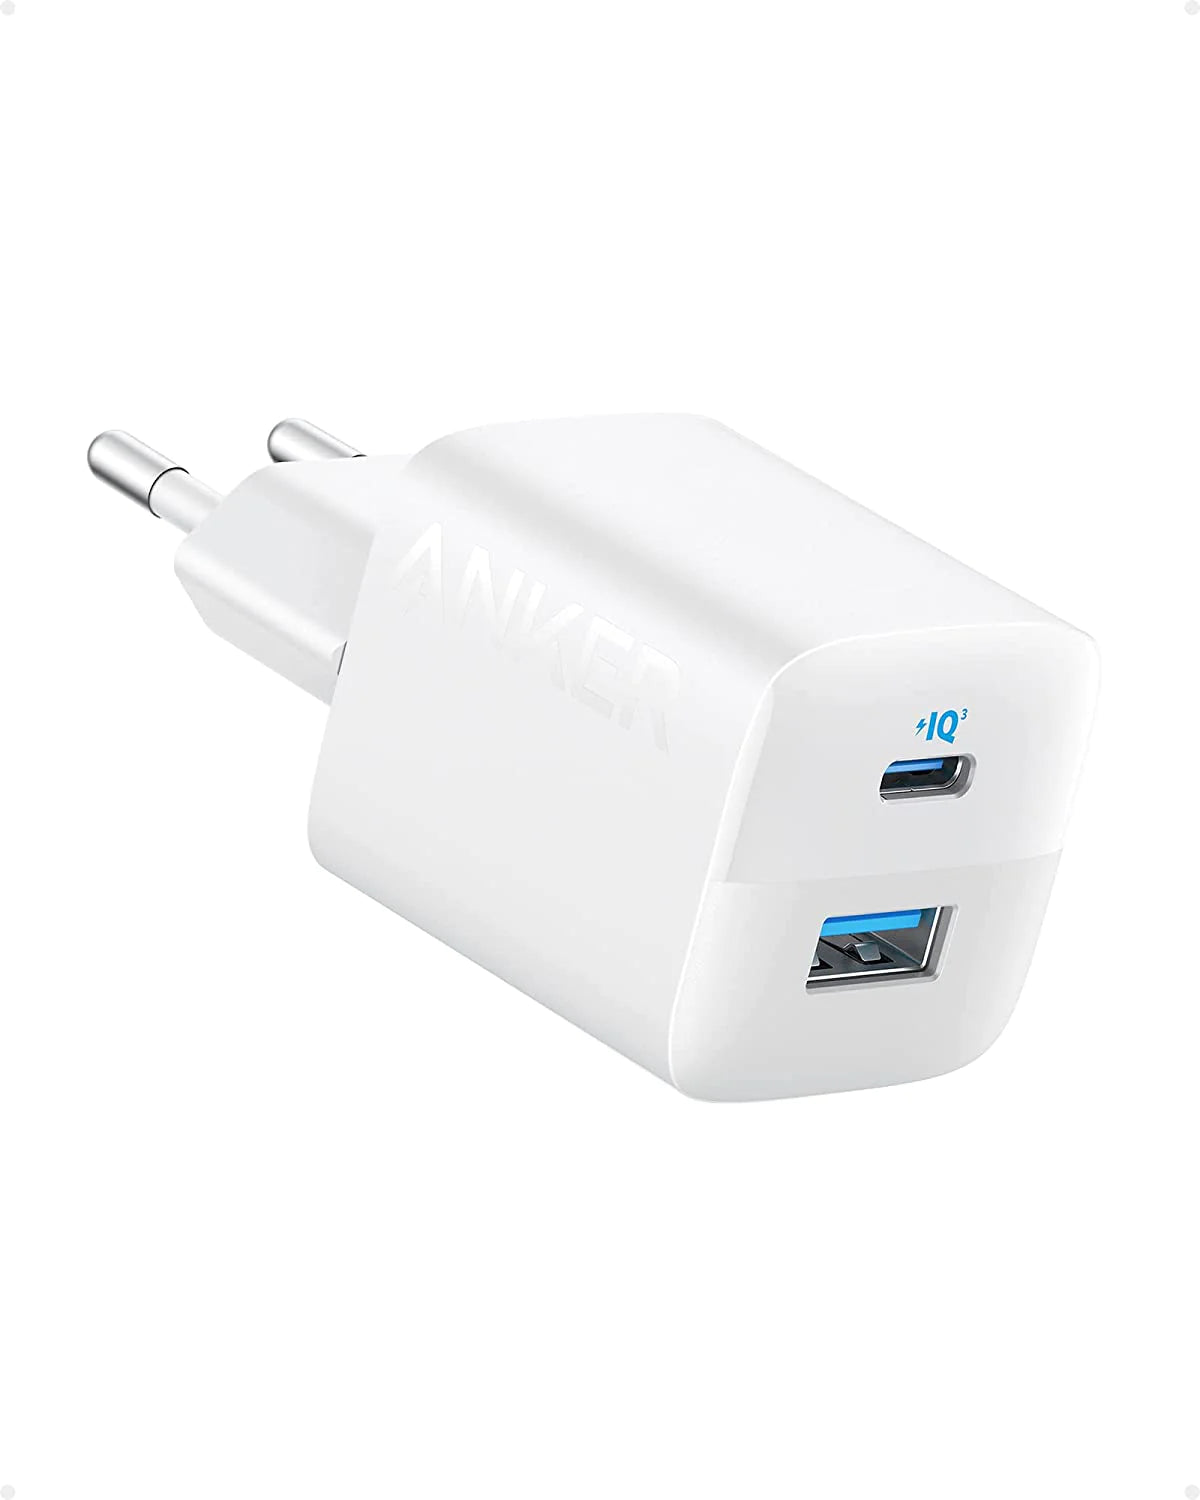 Anker 323 Charger (33W) - Fast charging for iPhone, Galaxy, iPad